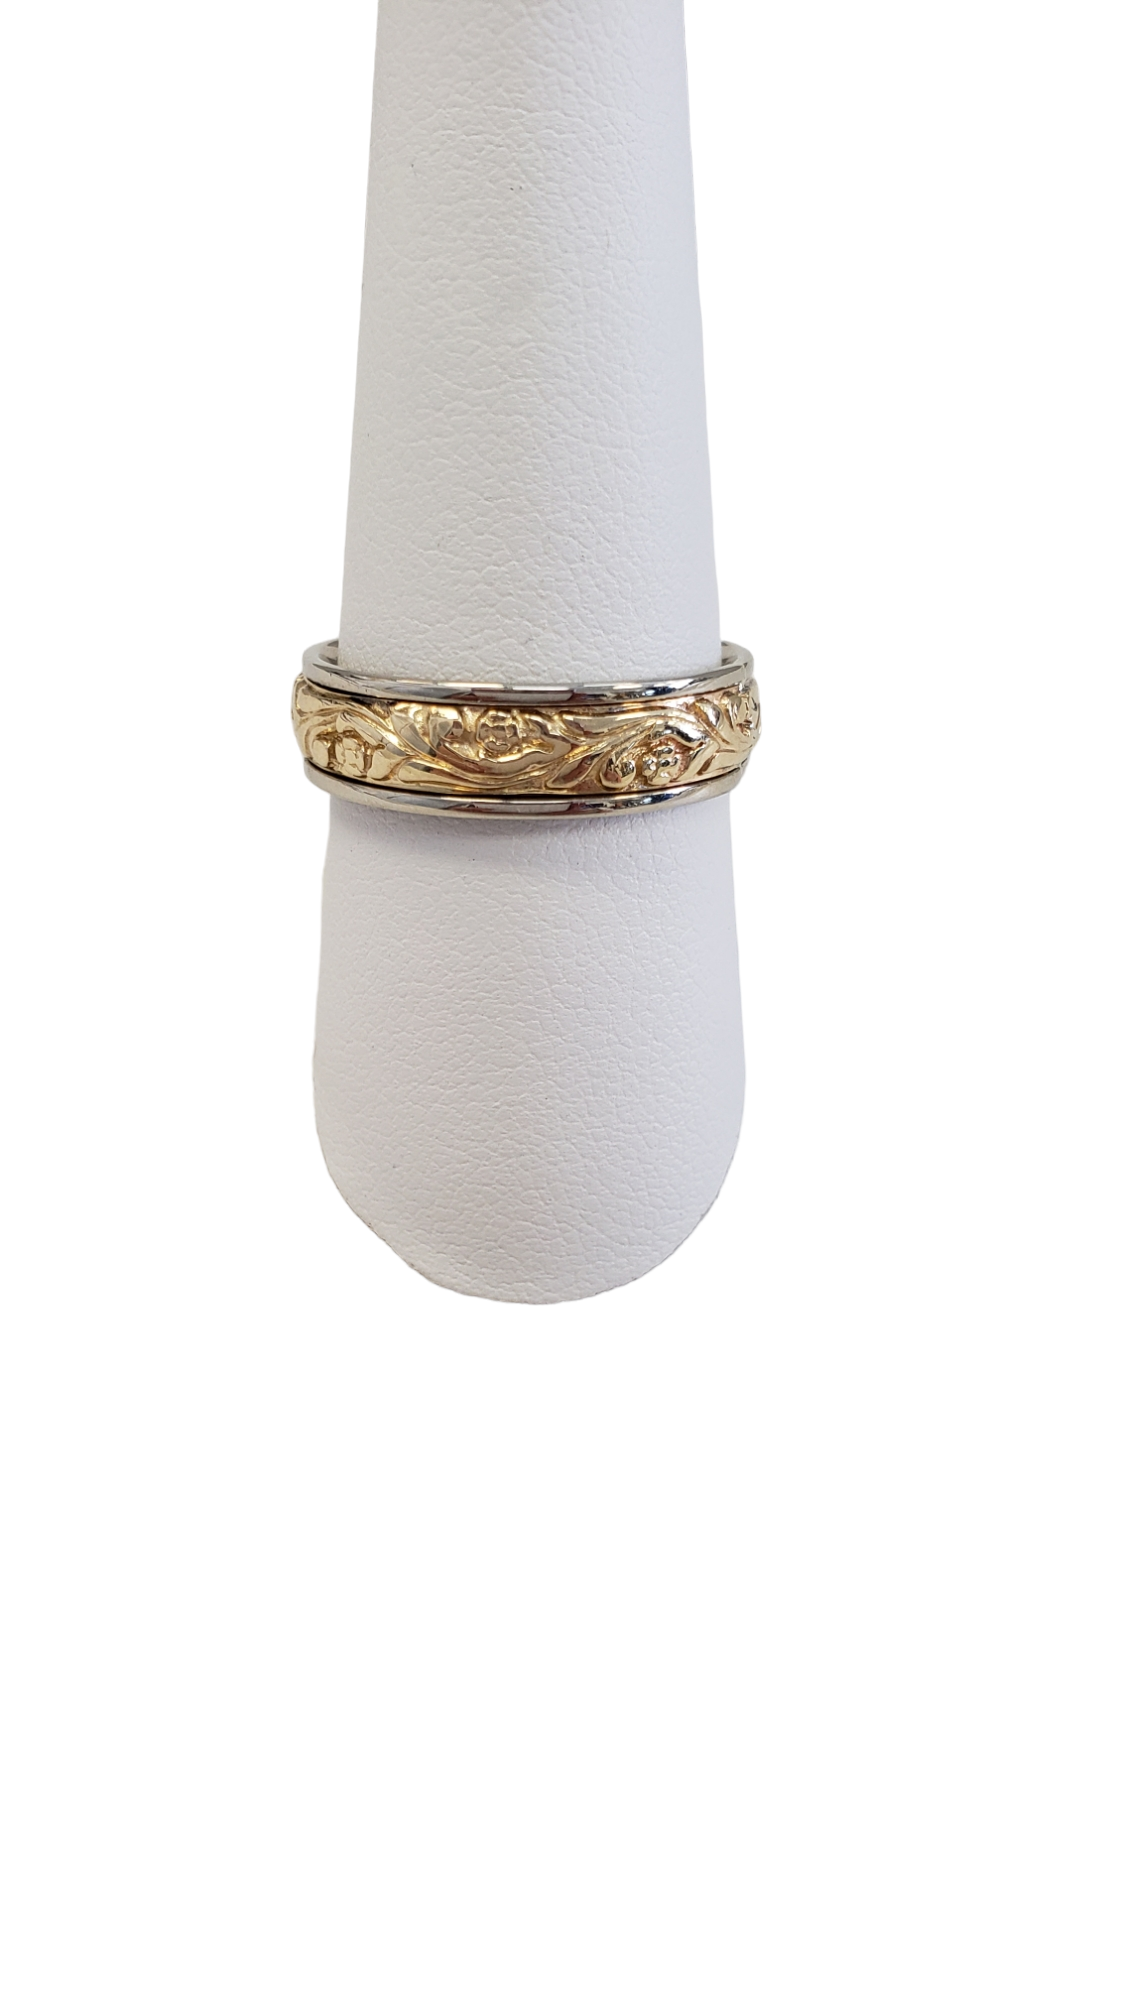 Gold Band Ring Two-Tone 14k White and Yellow Gold